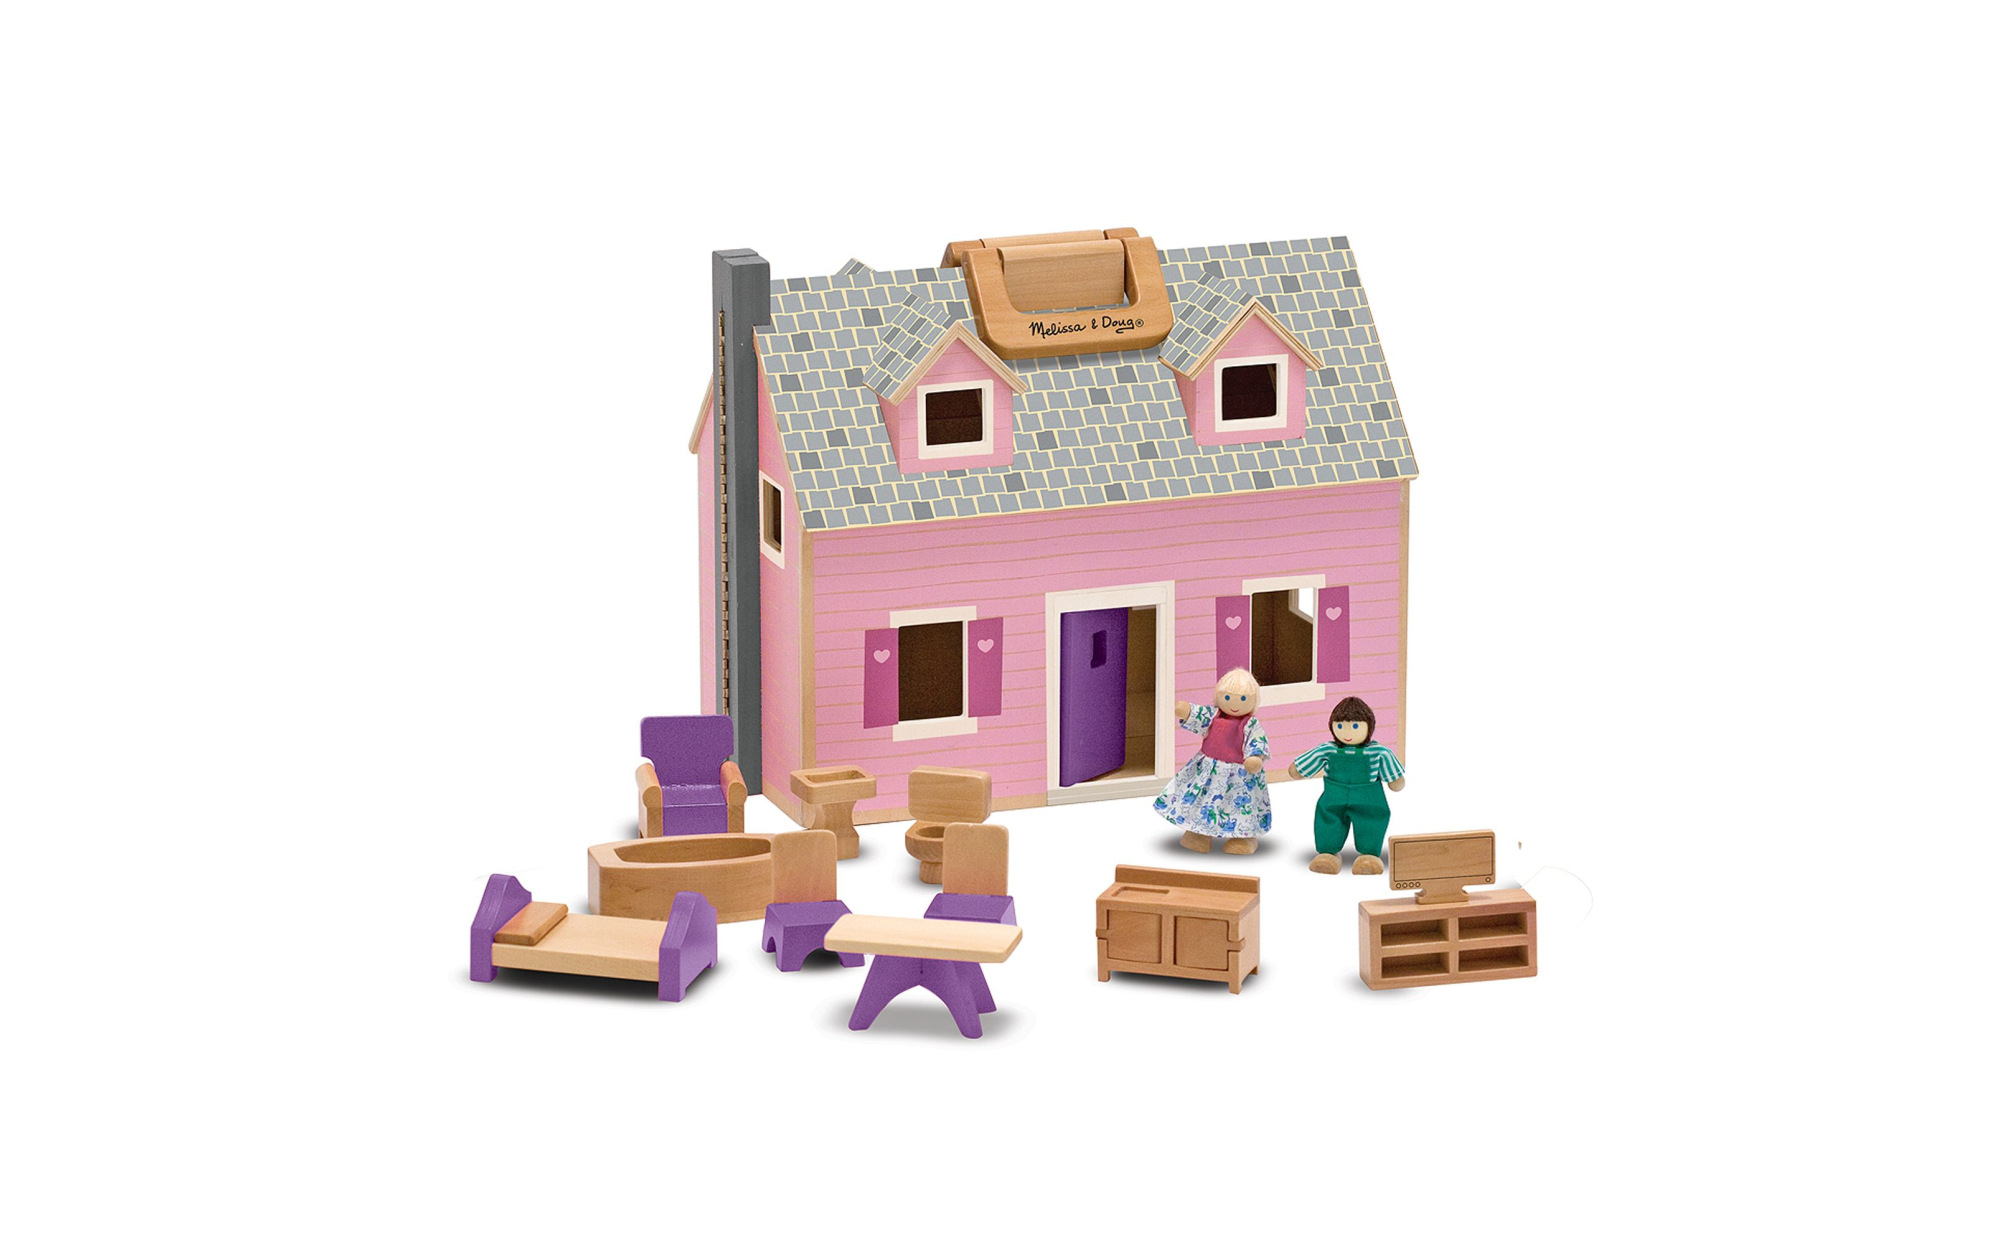 Plan Toys Victorian Doll House – My Sweet Muffin